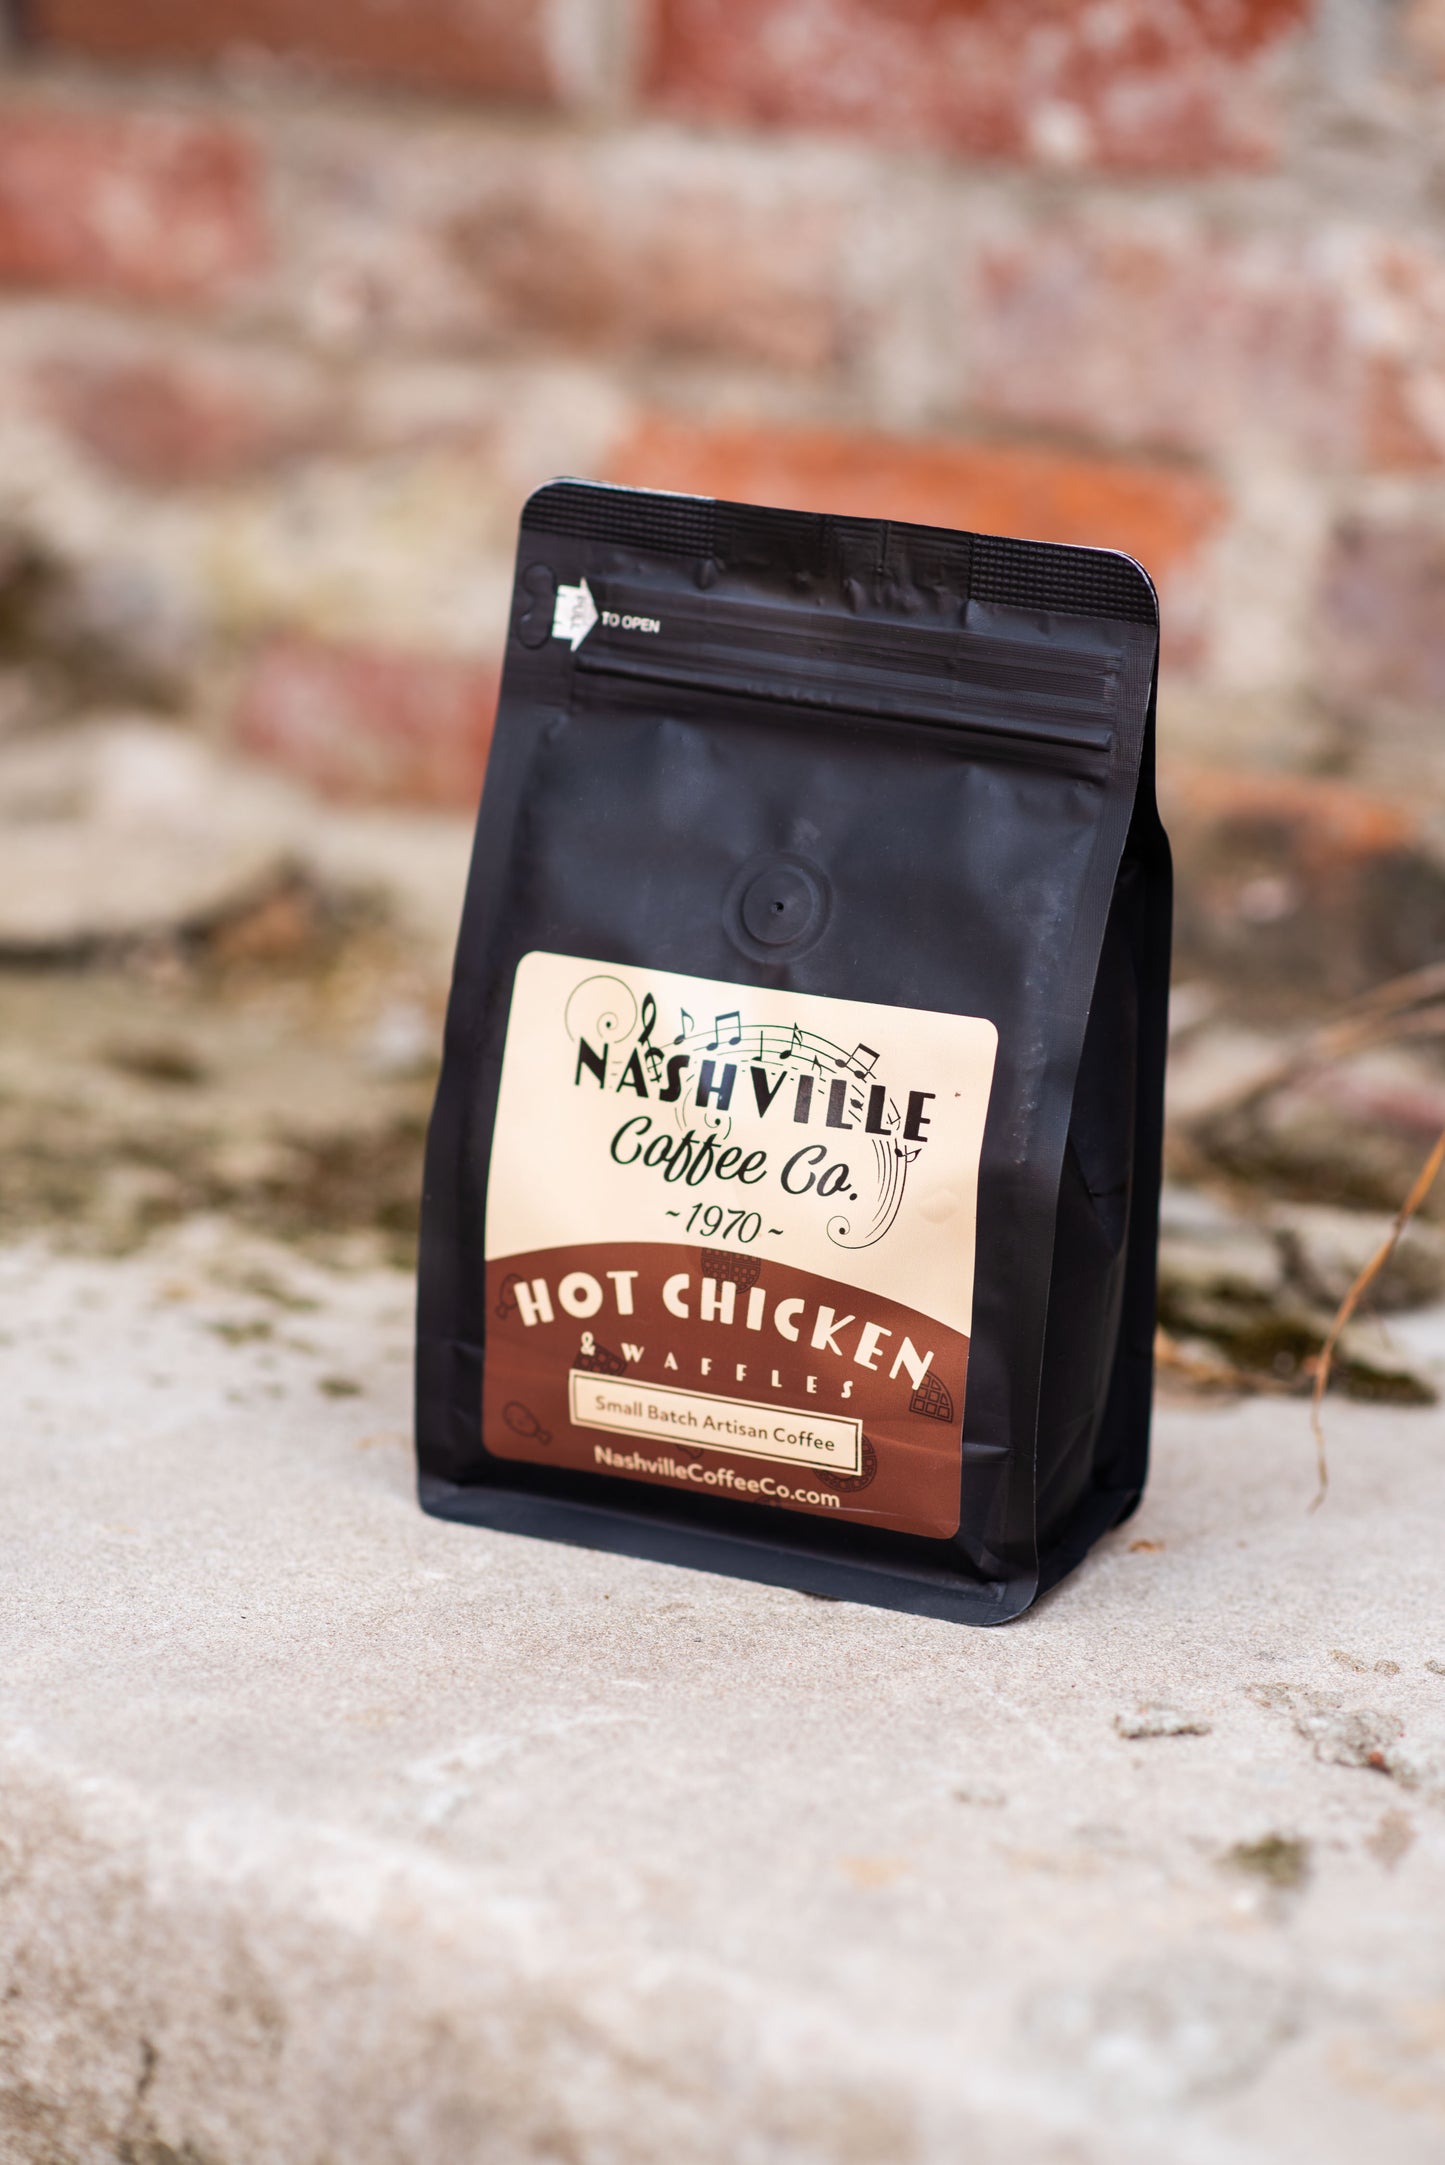 Nashville Coffee Co “Hot Chicken and Waffles” 12oz ground Bag